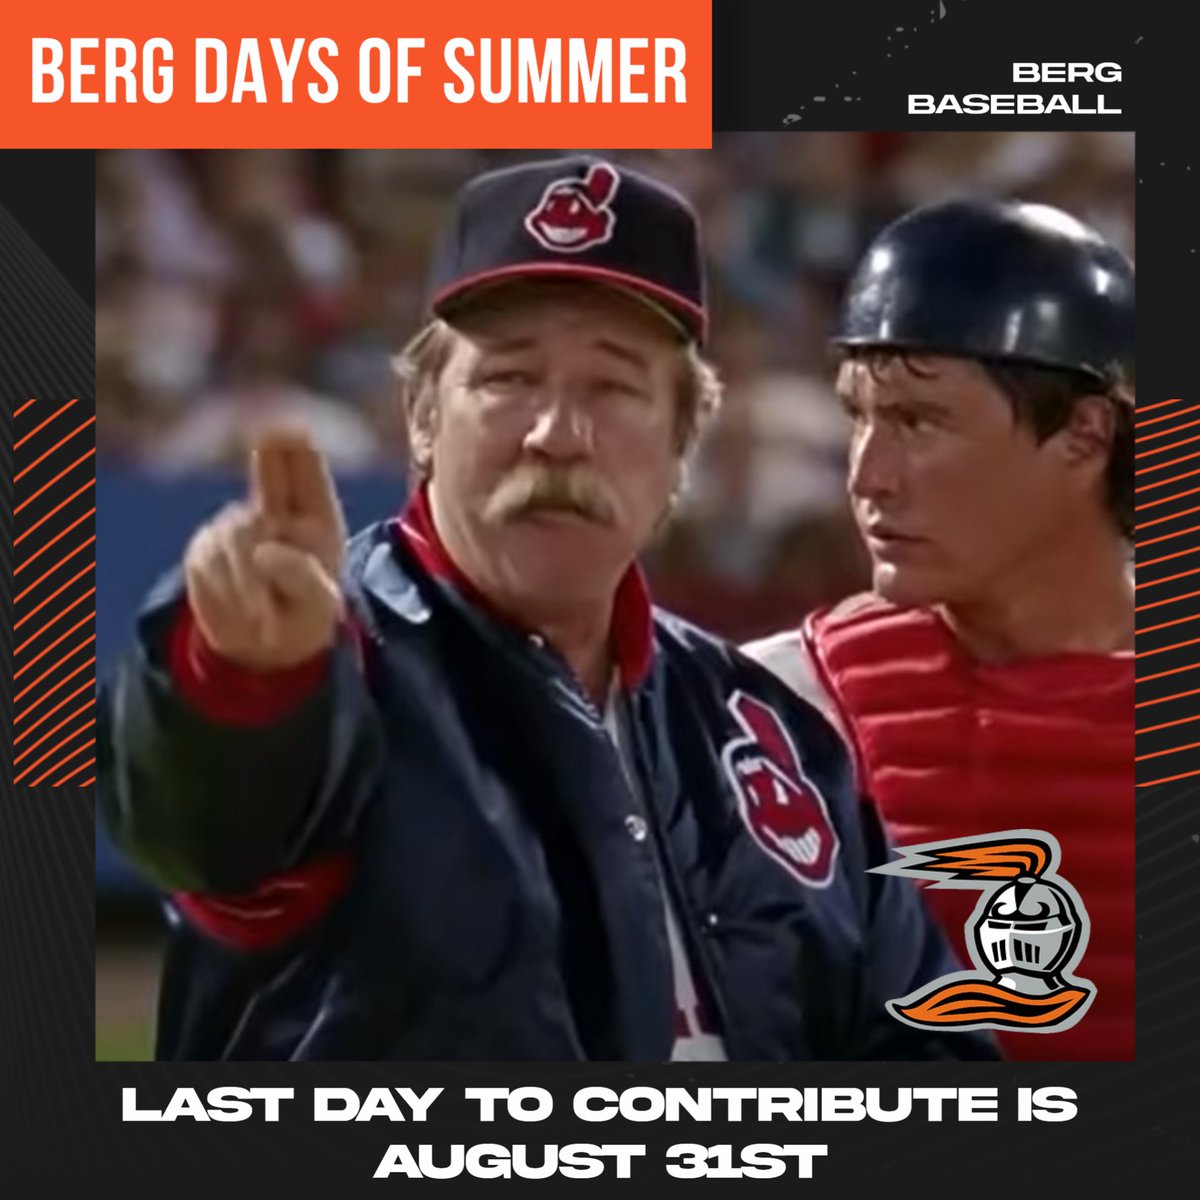 Coming up to the final inning of the @BergAthletics Berg Days of Summer!! Time to call in the closer to finish this thing off! Last day to contribute is tomorrow...visit bergathletics.com/august to bring the HEATER⚾️🔥